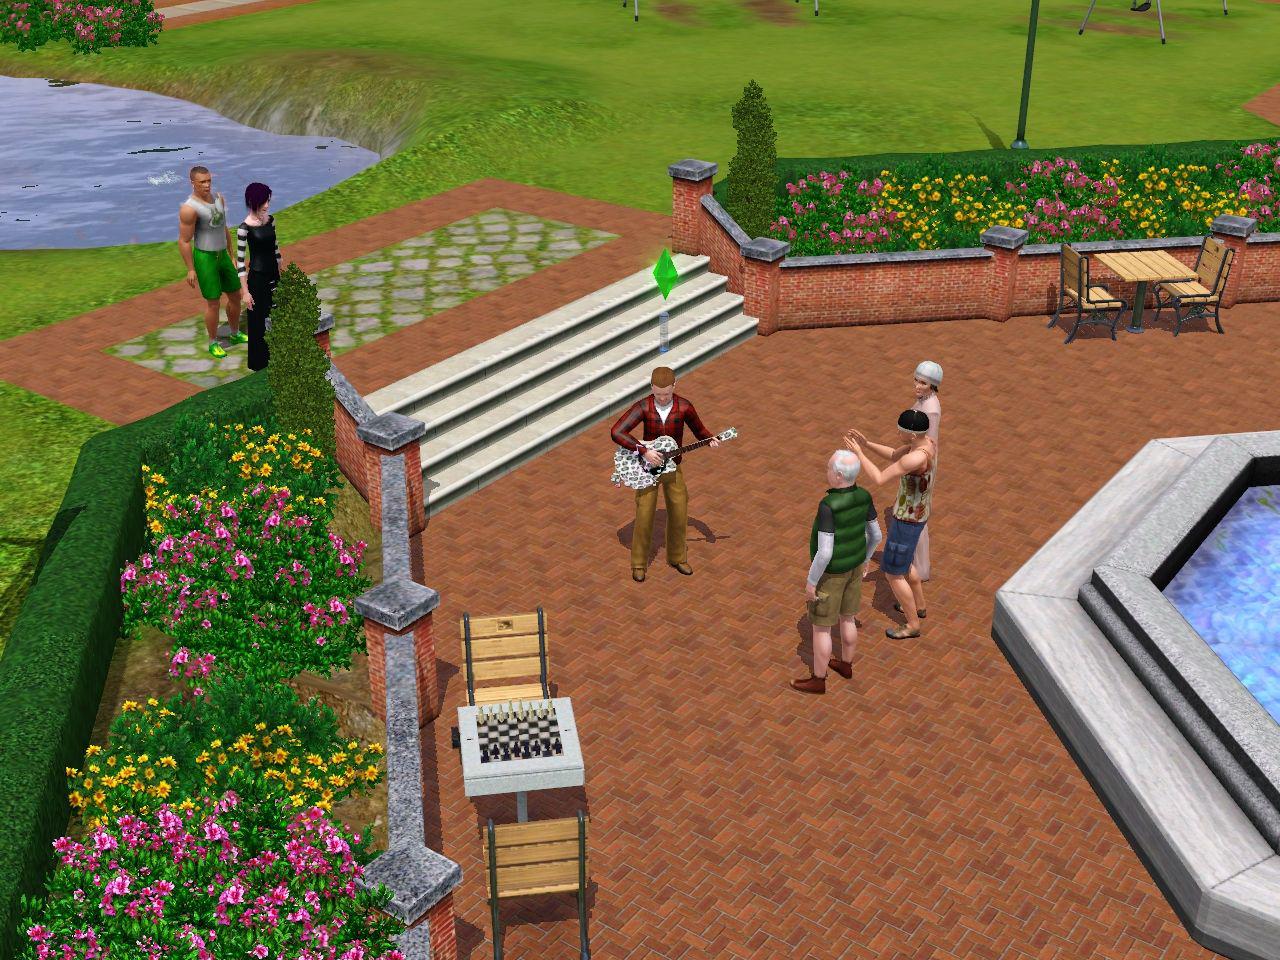 Sims 3, The Download (2009 Simulation Game) .